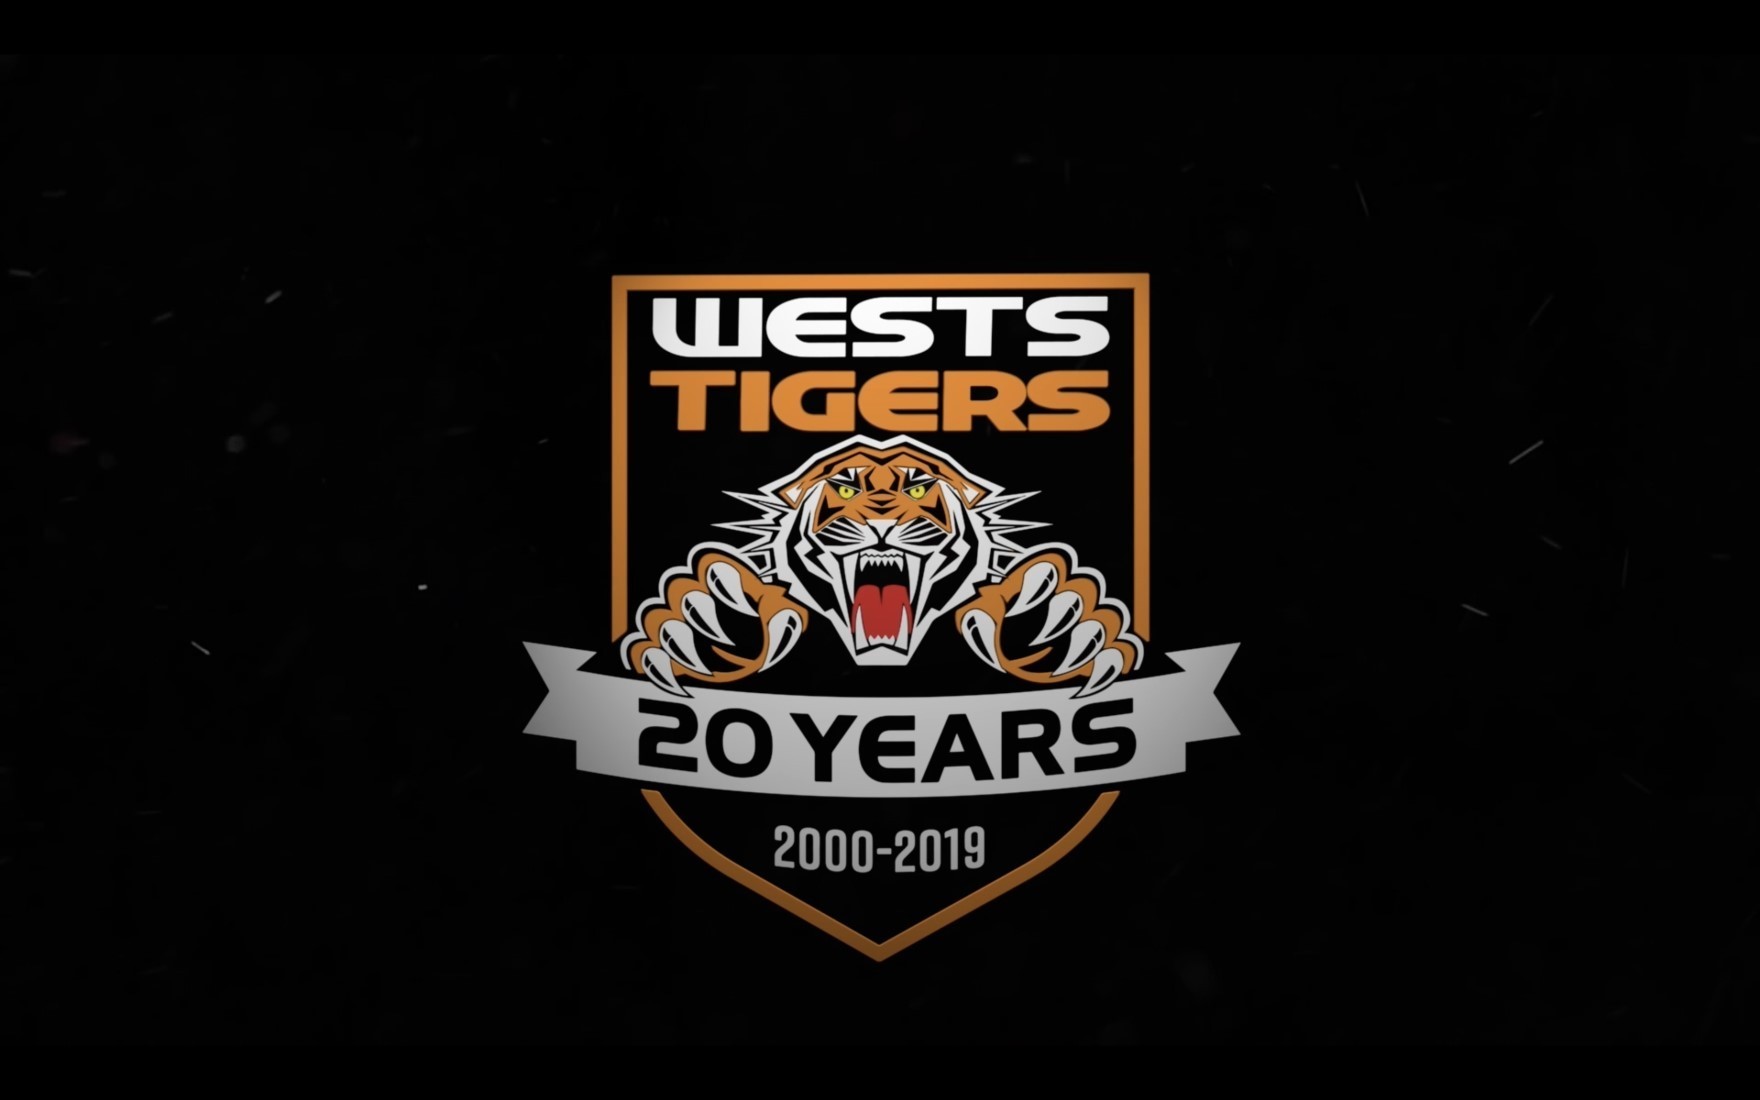 Wests Tigers 20 Years Wallpaper